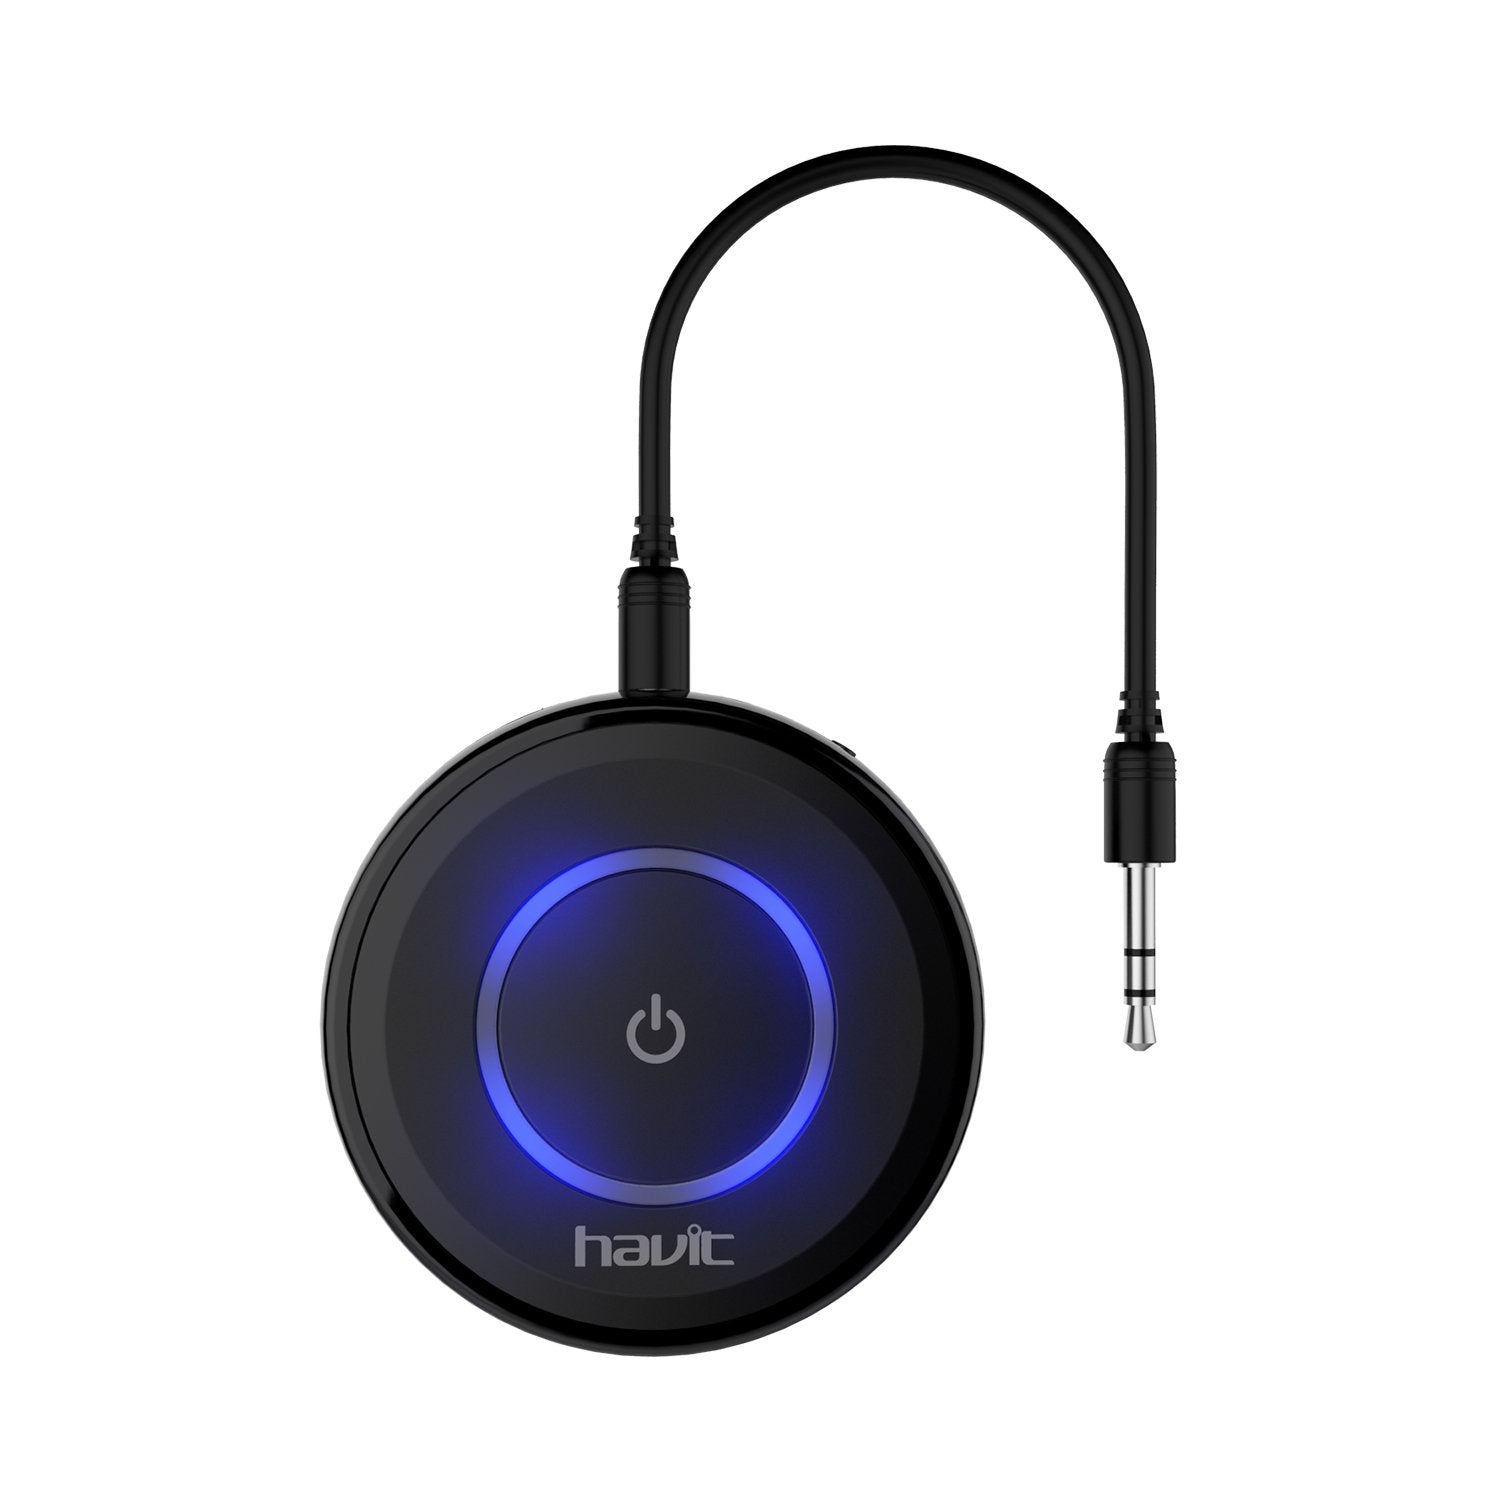 HAVIT HV-BT018 Bluetooth 4.1 Transmitter and Receiver with Low Latency